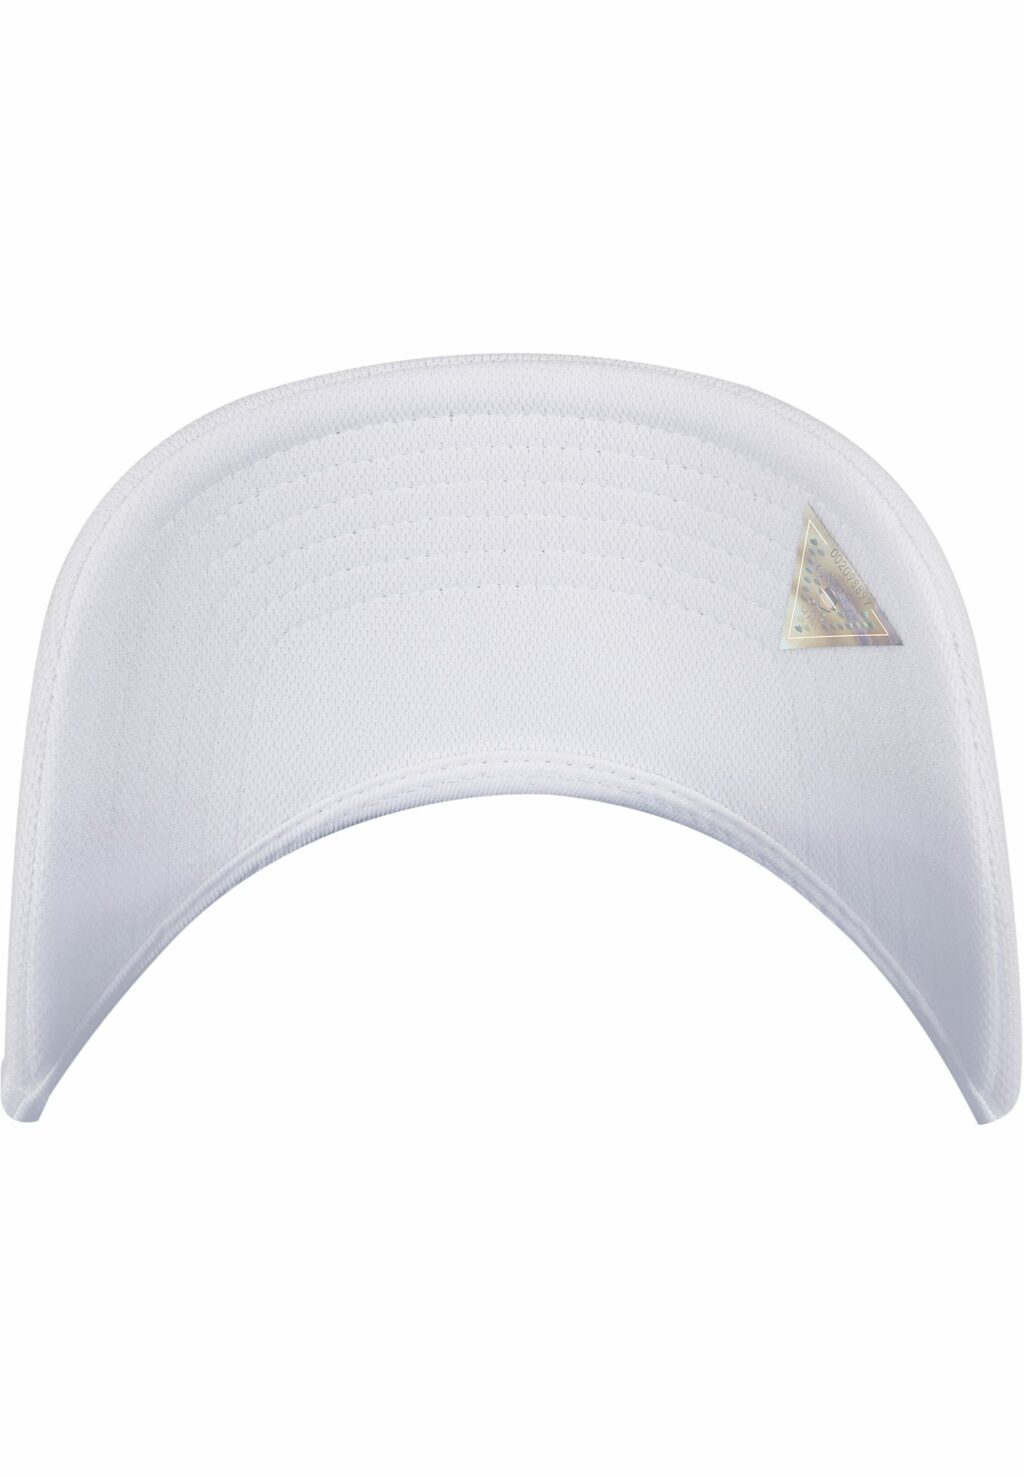 C&S WL Forever Six Curved Cap white/mc one CS2388